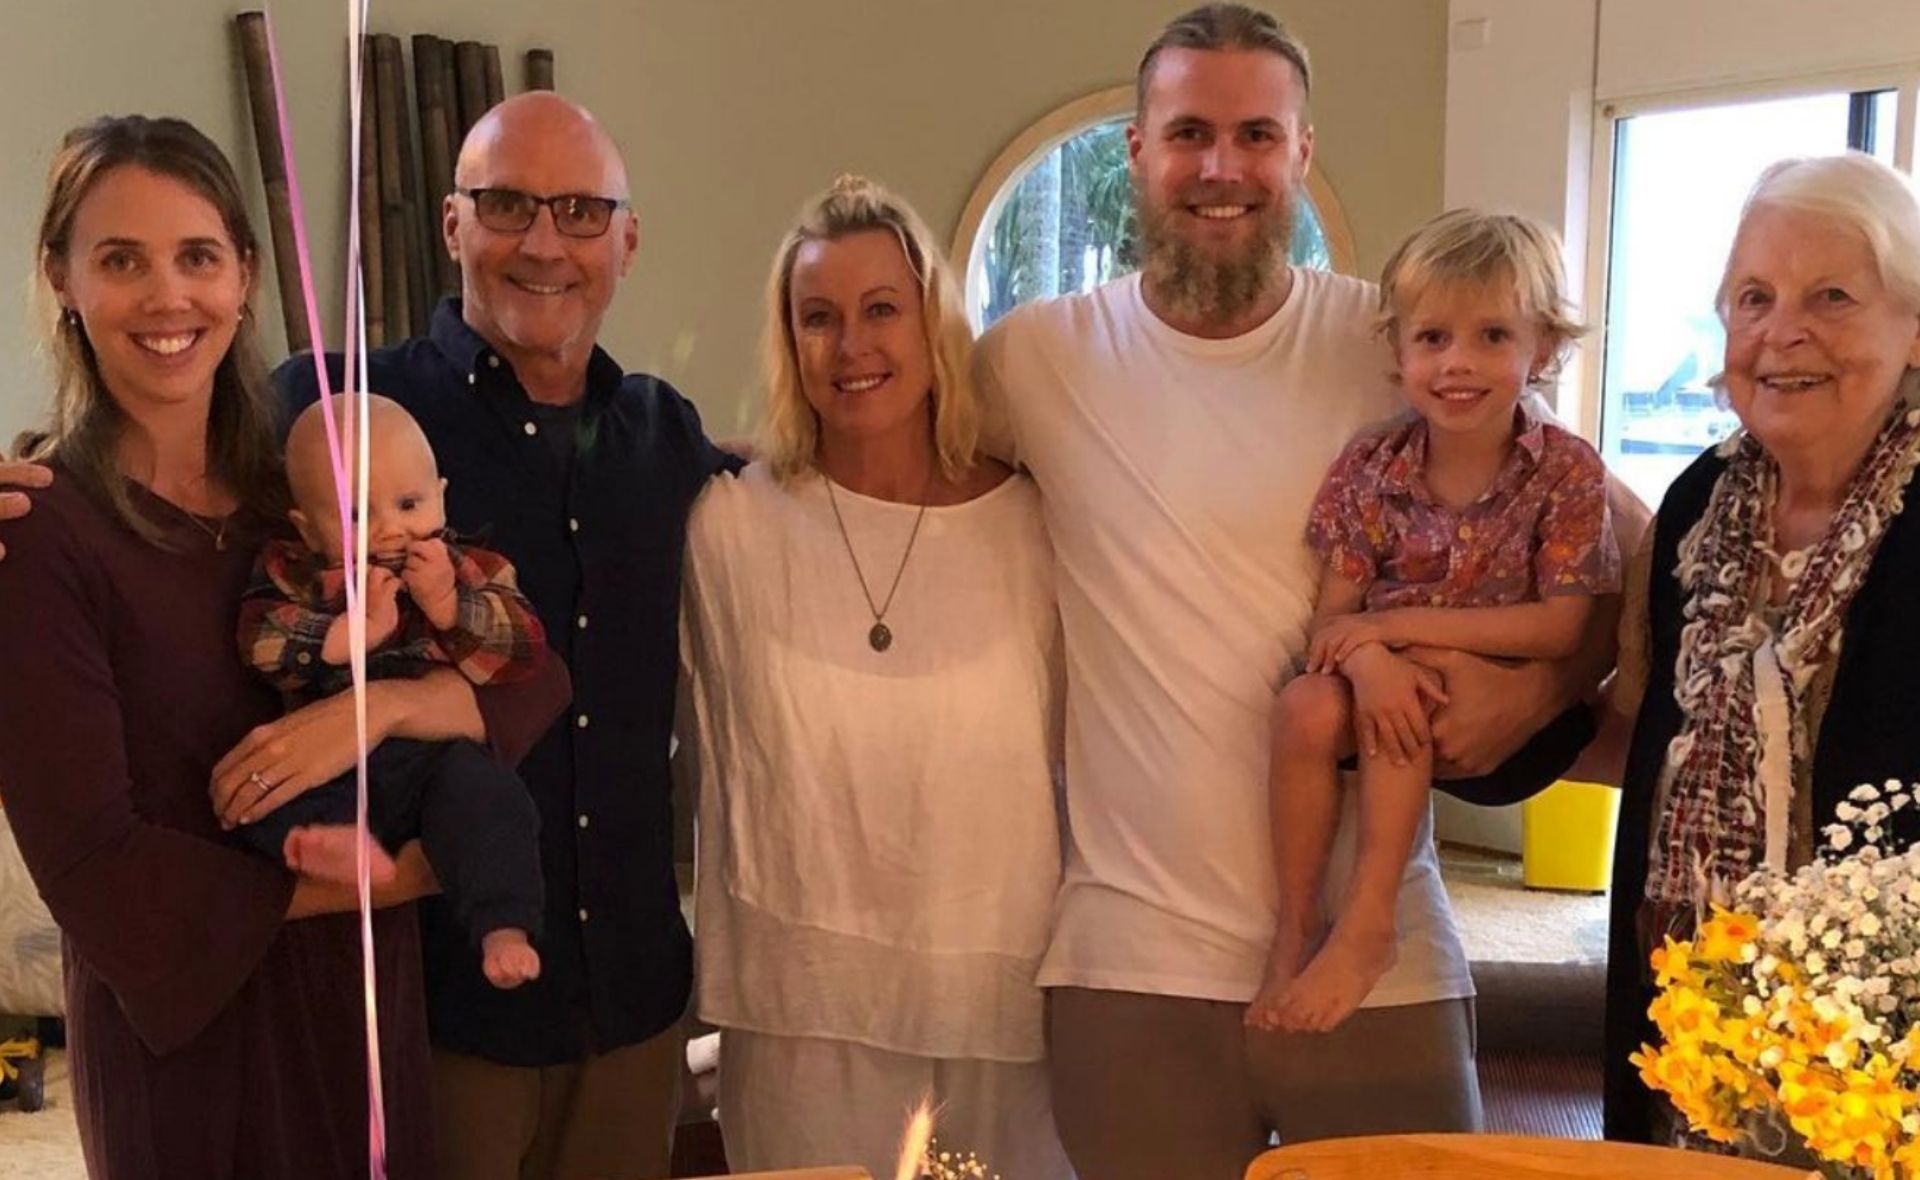 Lisa Curry and Grant Kenny reunite to celebrate their daughter Jaimi’s first birthday since she passed away last year